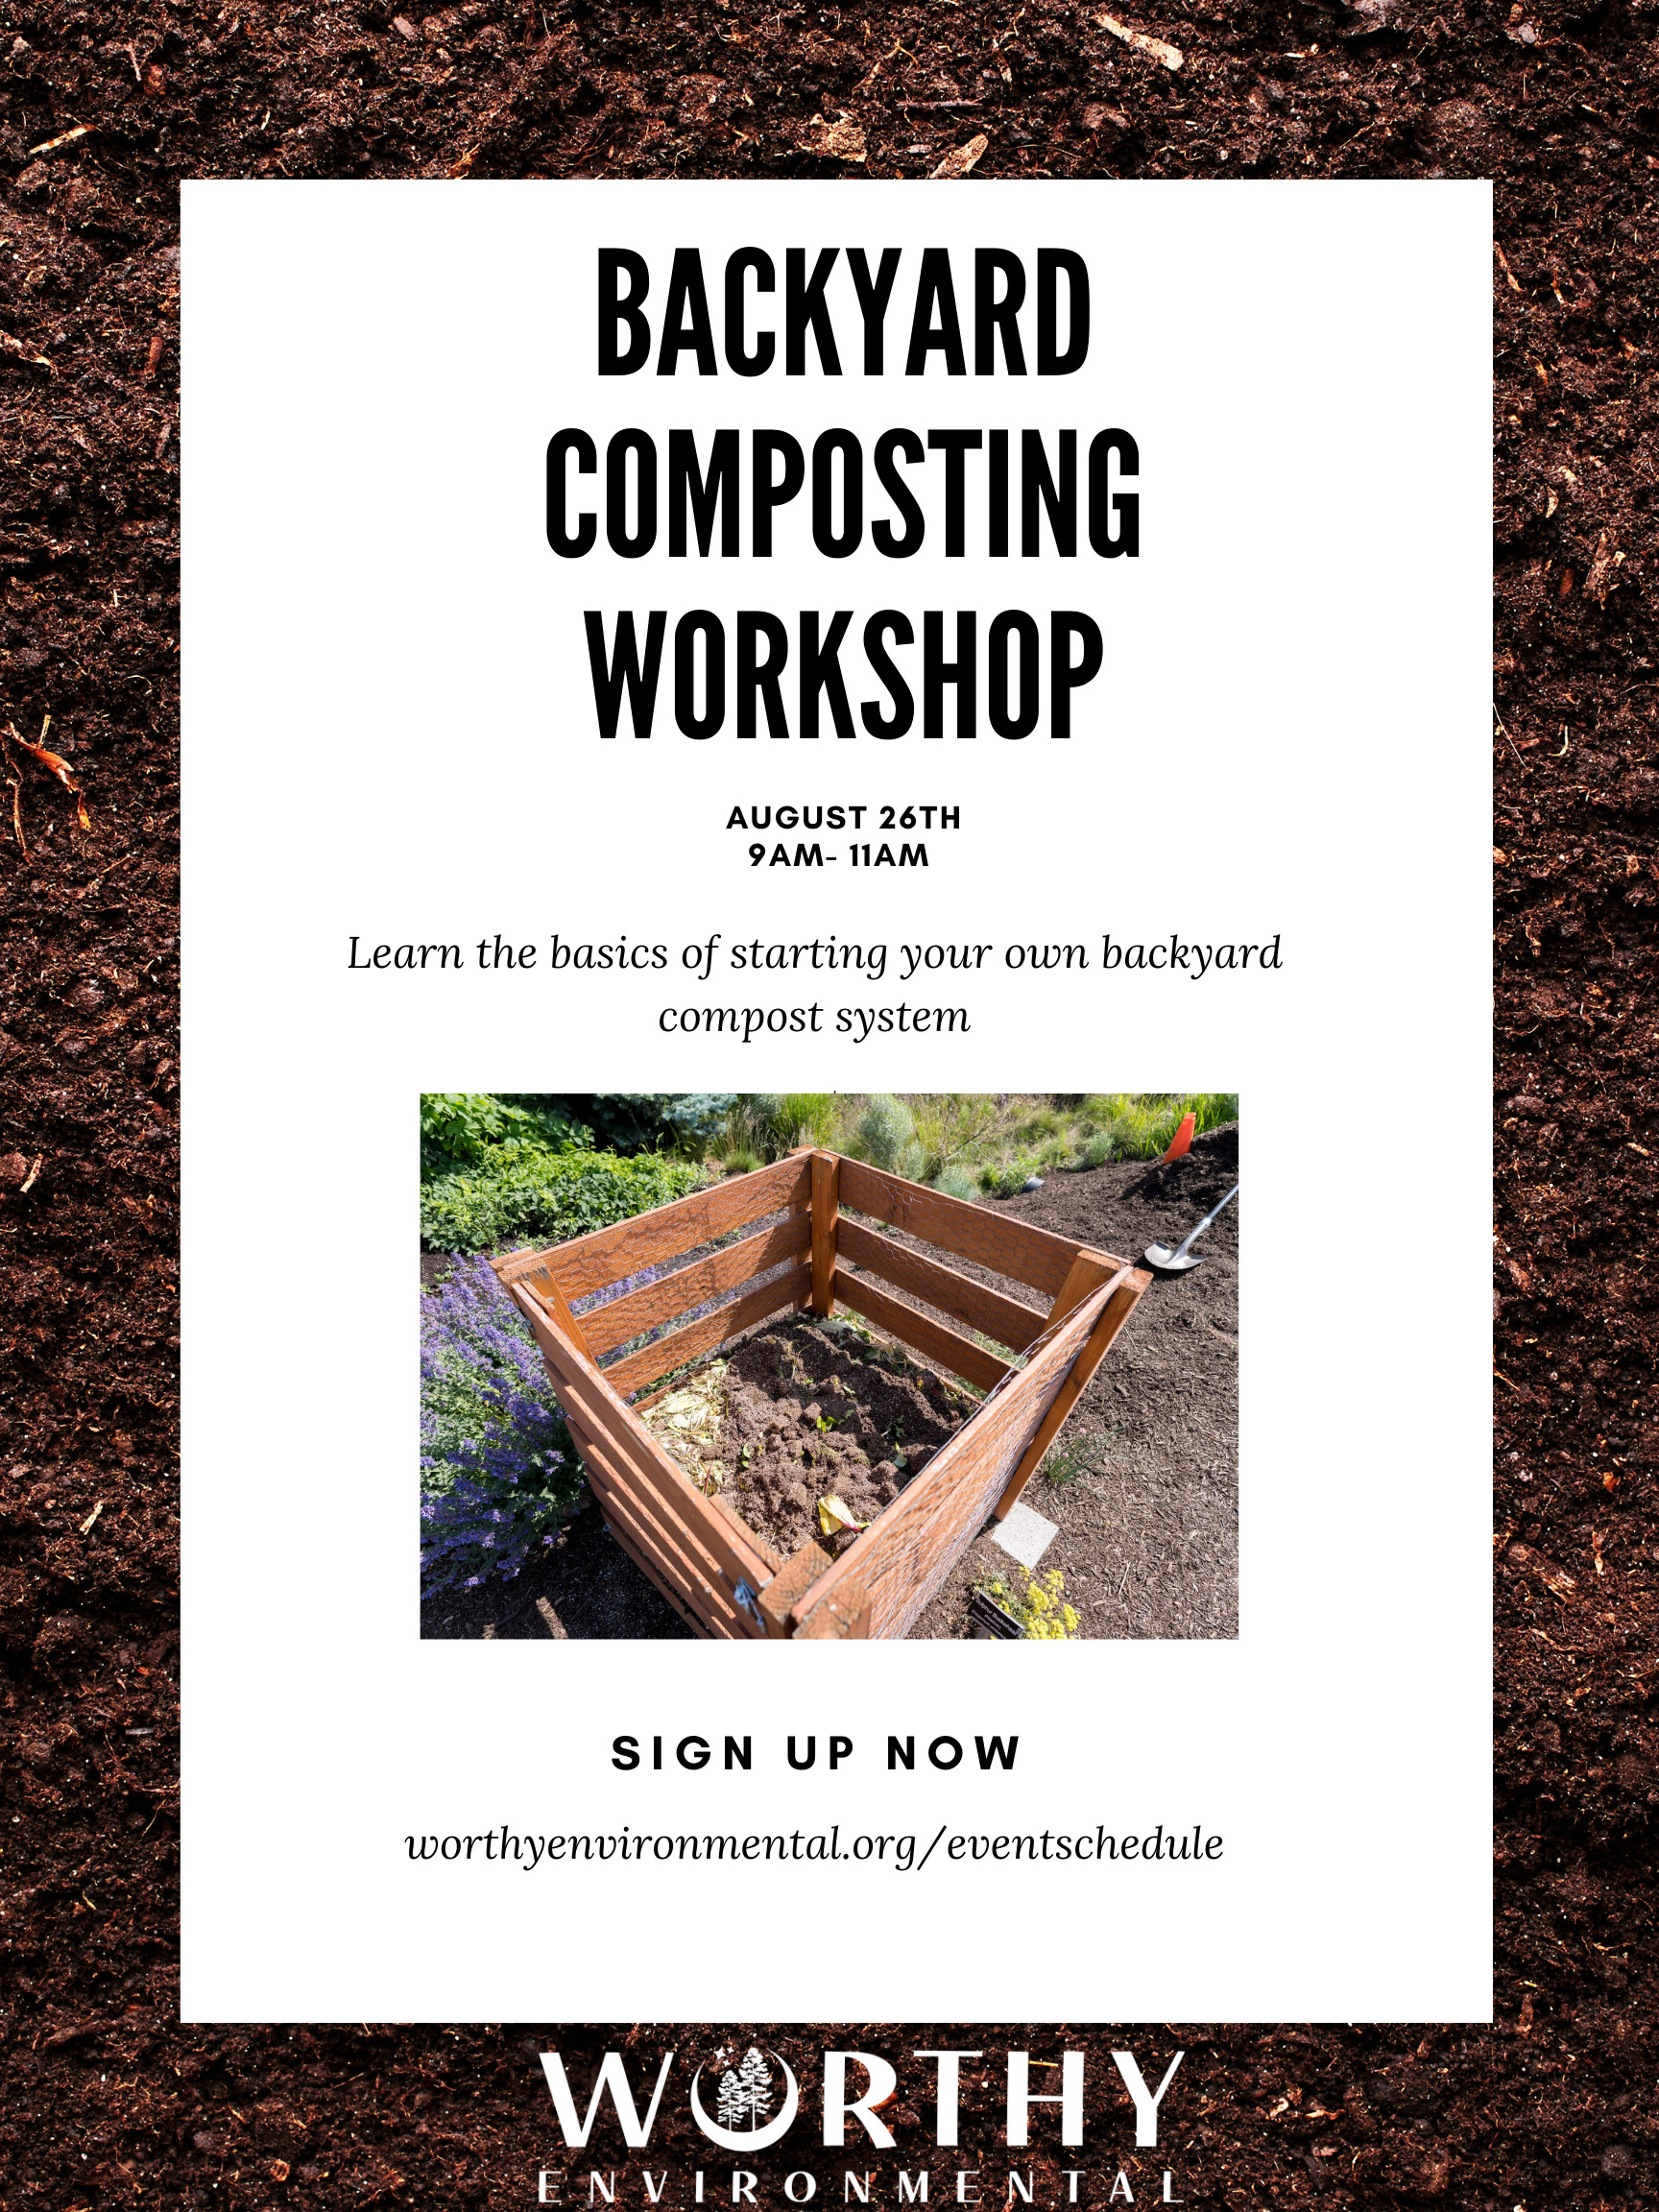 A poster sitting on soil that reads "Backyard Composting Workshop August 26th 9am-11am Learn the basics of starting your own backyard compost system Sign Up Now worthyenvironmental.org/eventschedule"